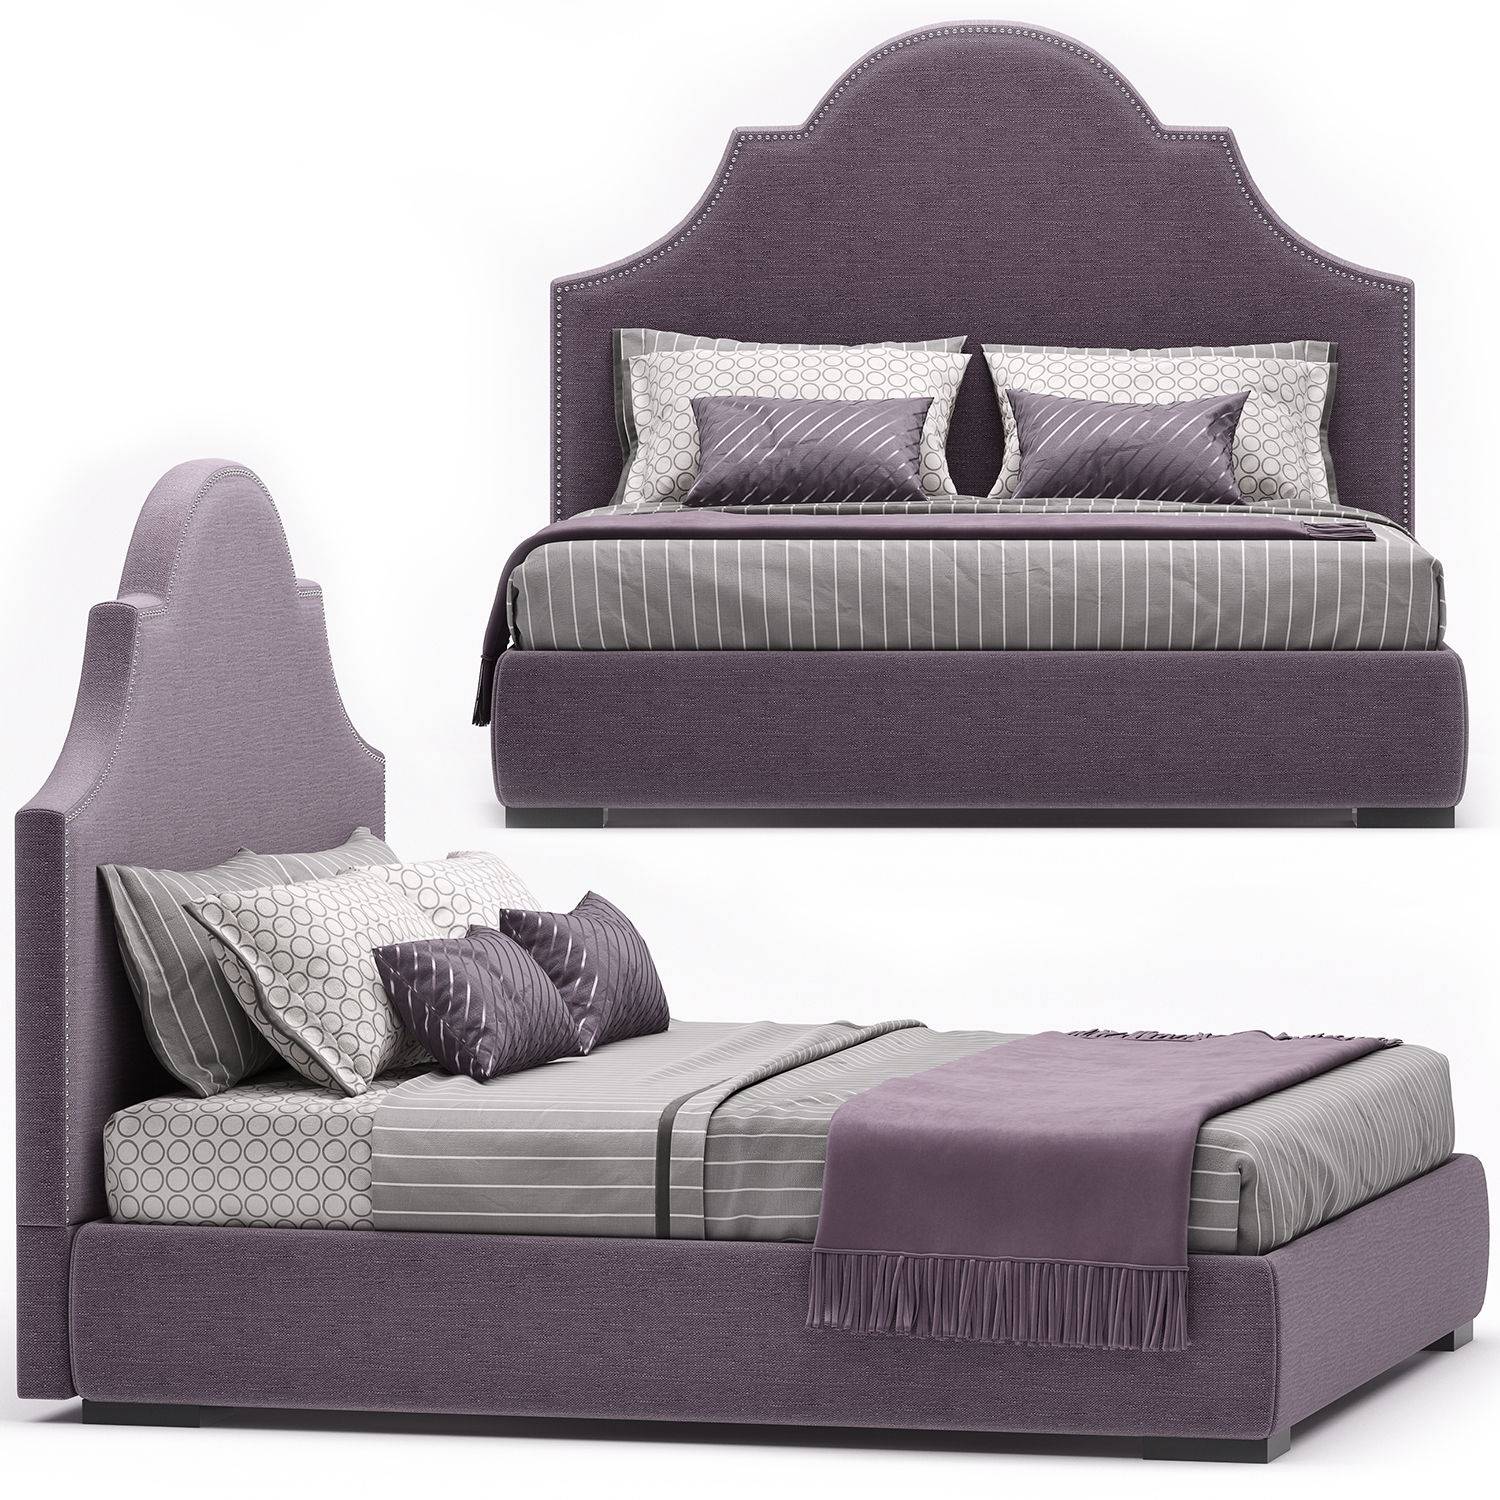 queen bed wholesale latest simple modern design wooden fabric upholstered beds 